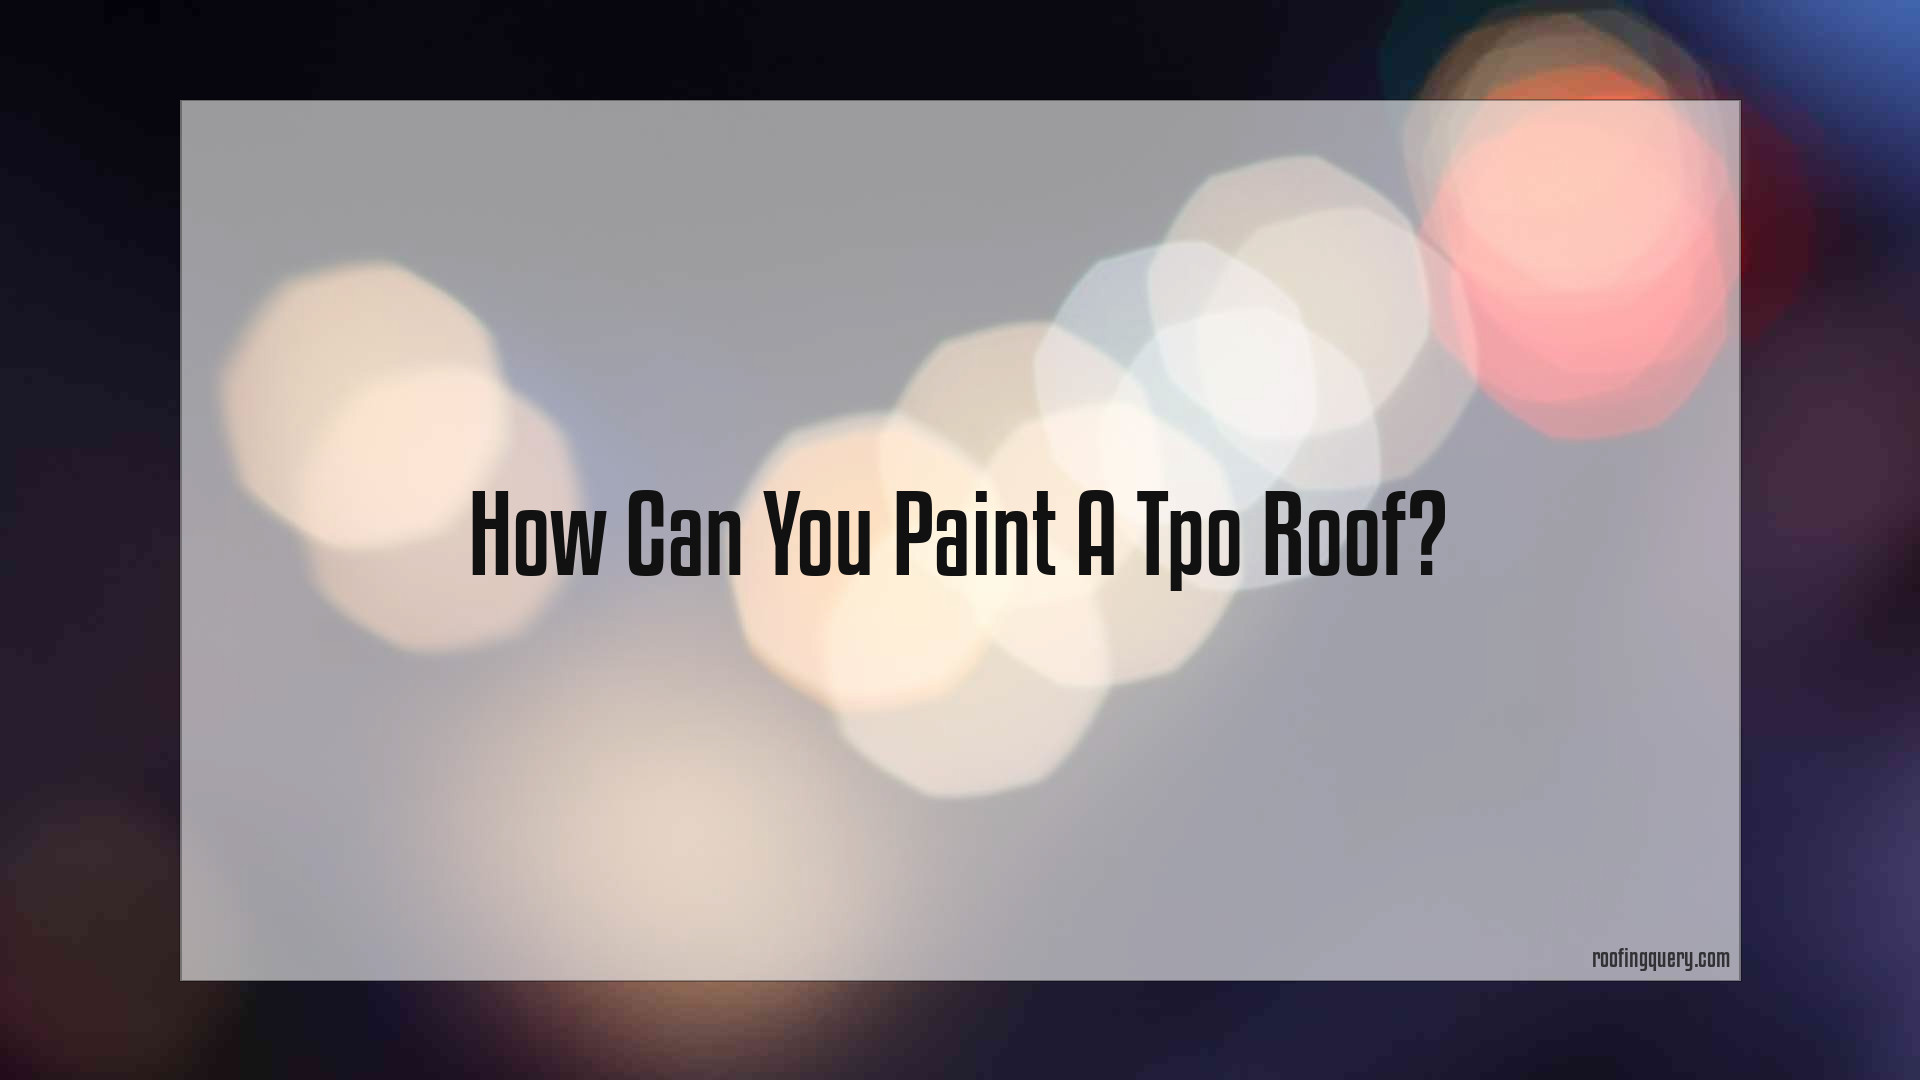 Can You Paint A Tpo Roof